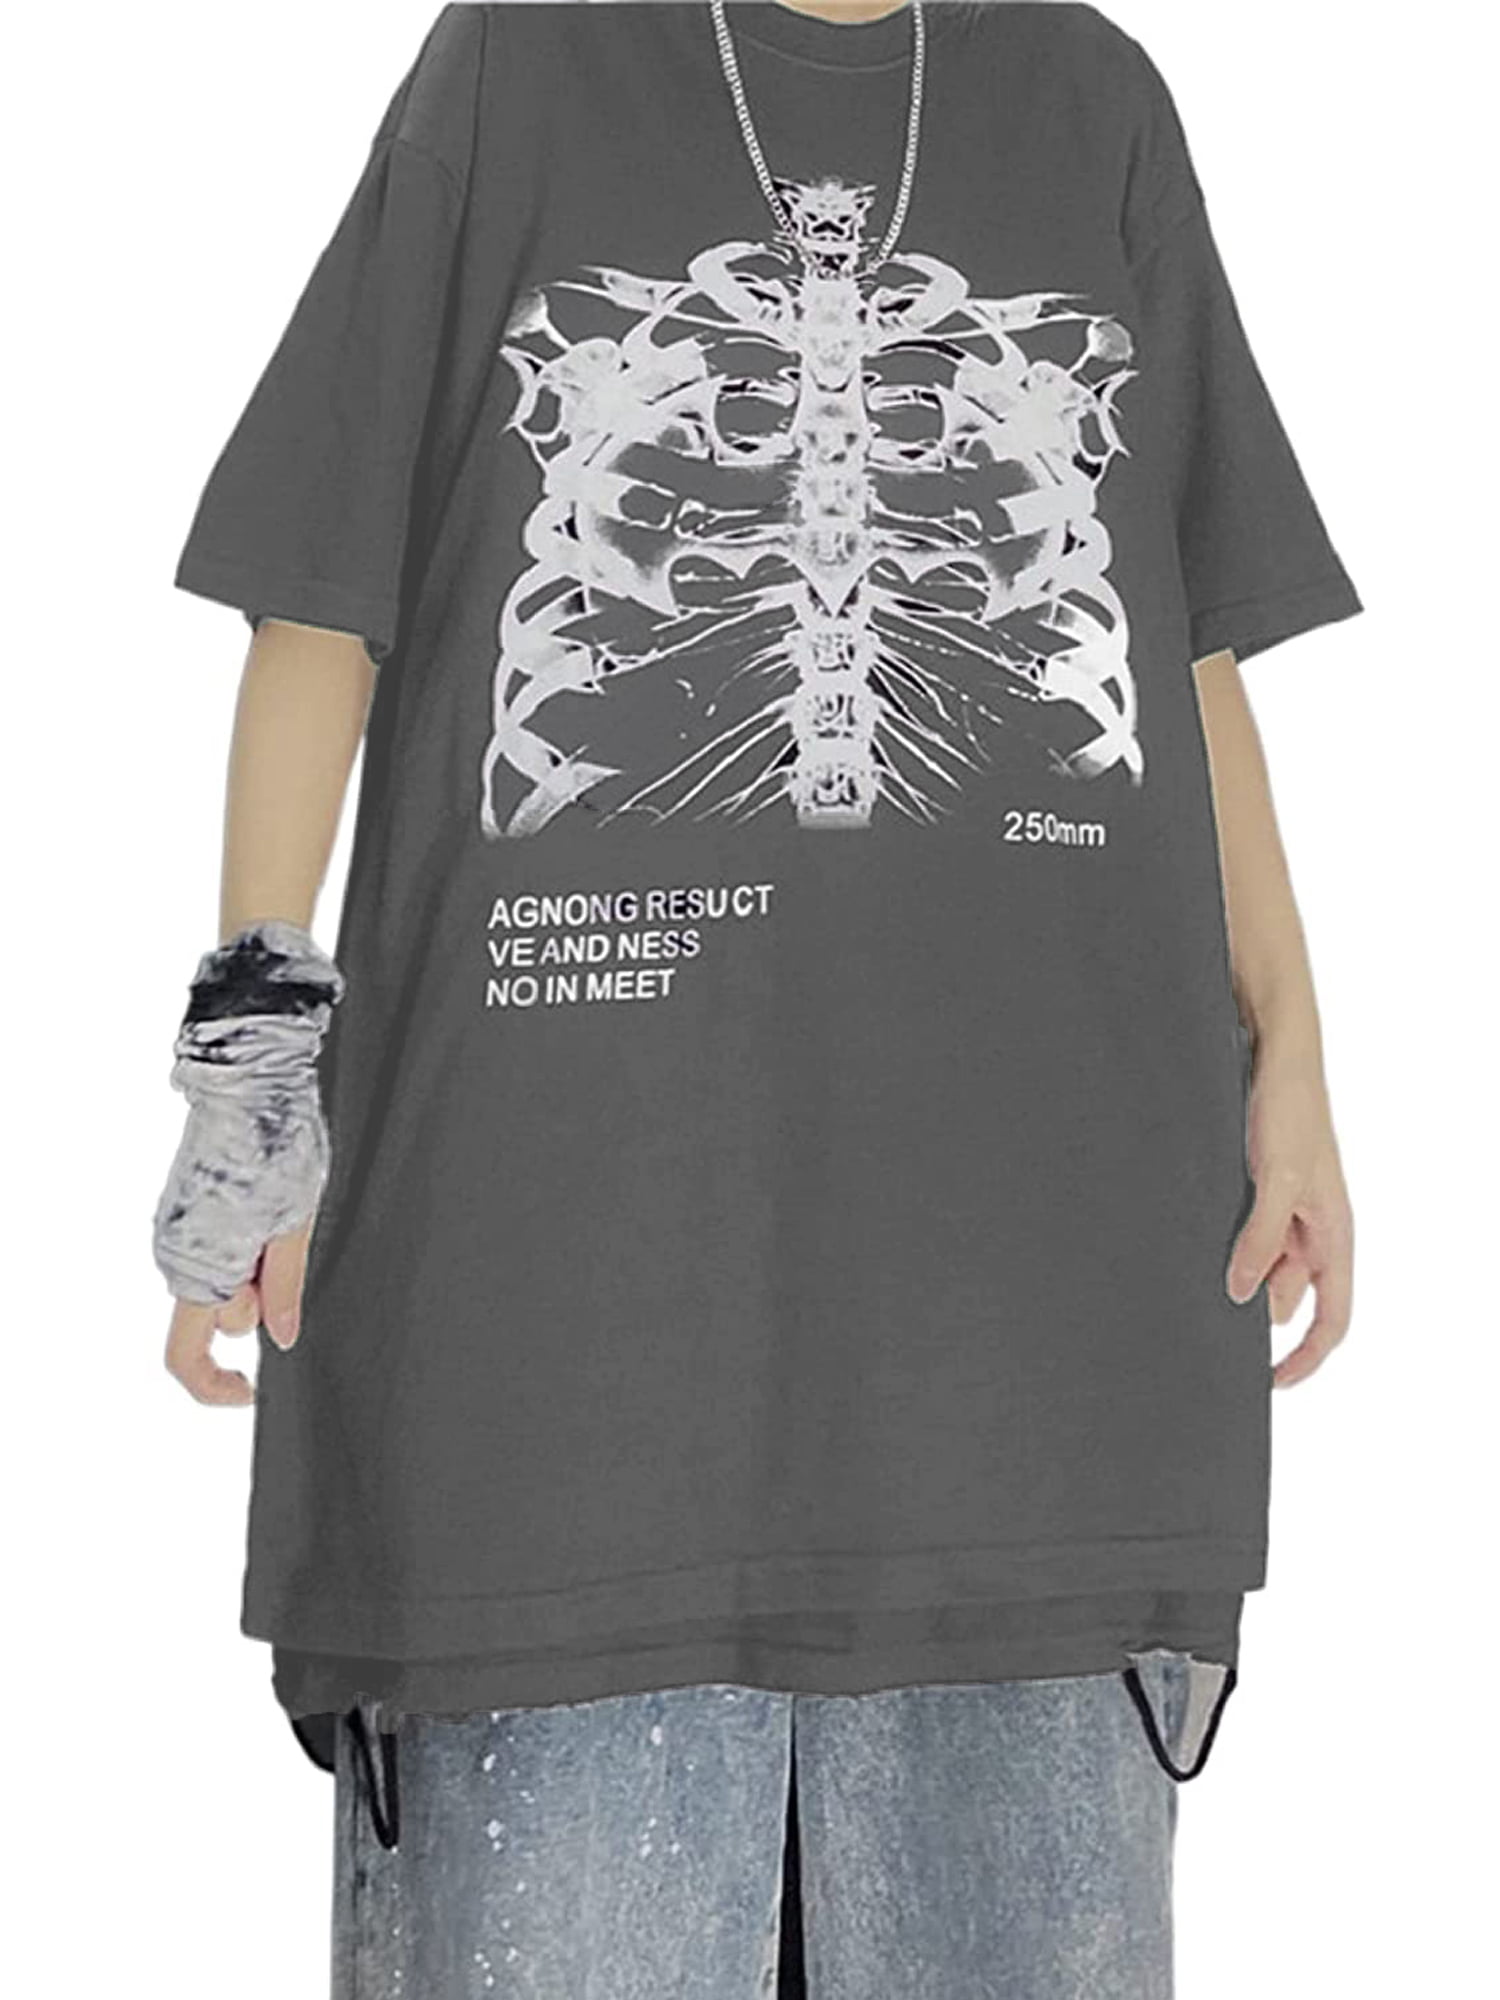 Eyicmarn Vintage Bone Printed T-Shirt Oversize Short Sleeve Tops 90S Y2K  Round Neck Blouse Halloween Clothes